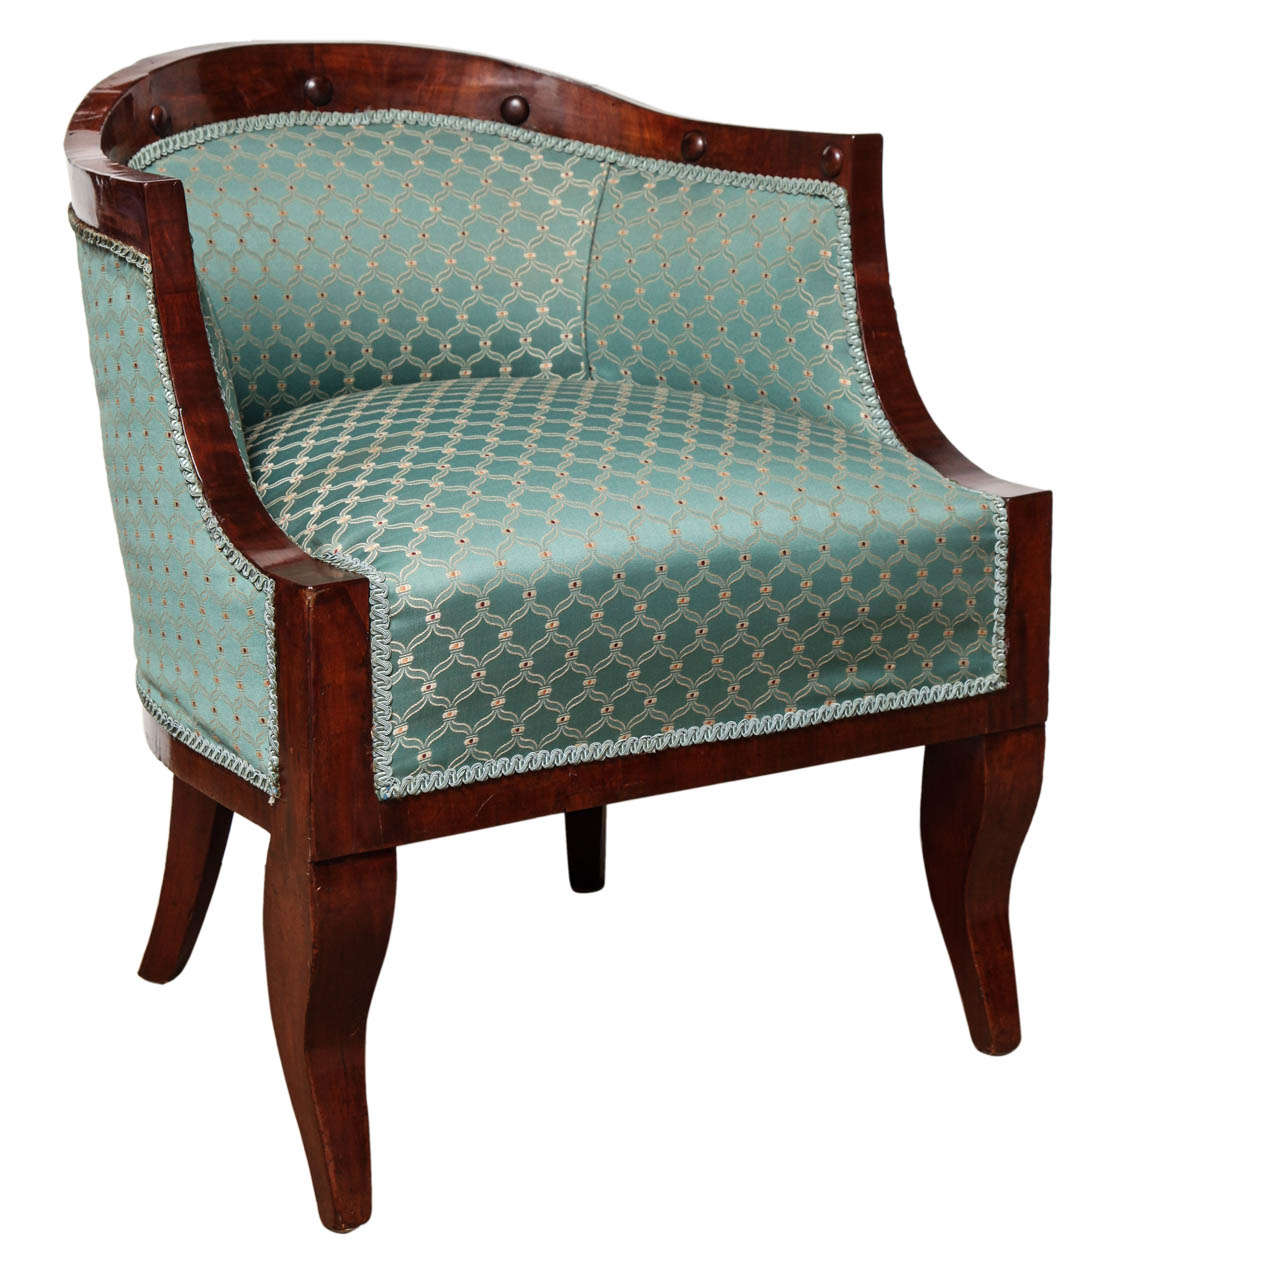 Early - 19th Century Viennese Armchair For Sale